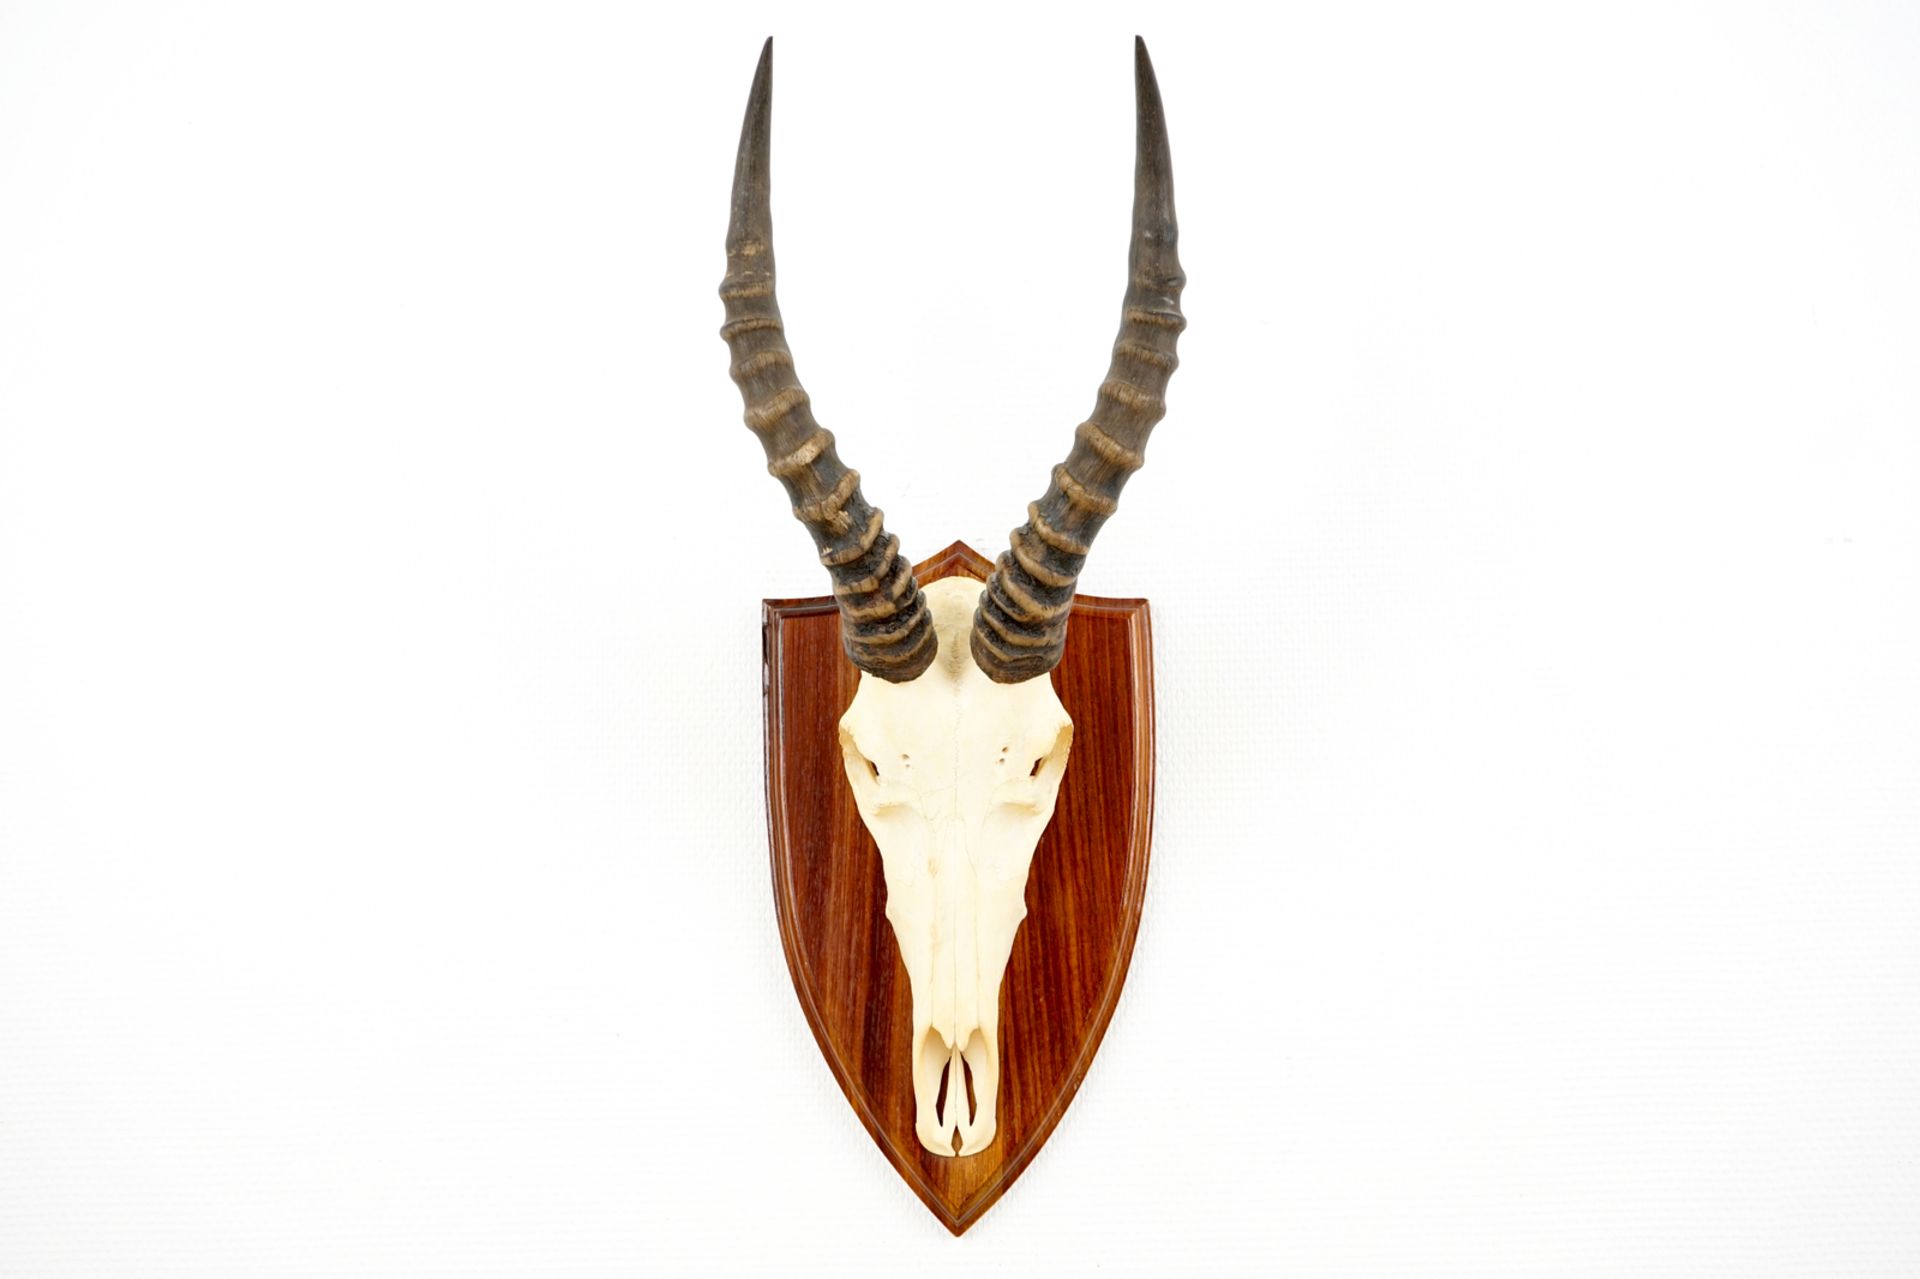 Three horned skulls of a blesbok, impala and reedbuck, mounted on wood H.: 62 cm - L.: 22 cmH.: 45 - Image 13 of 18